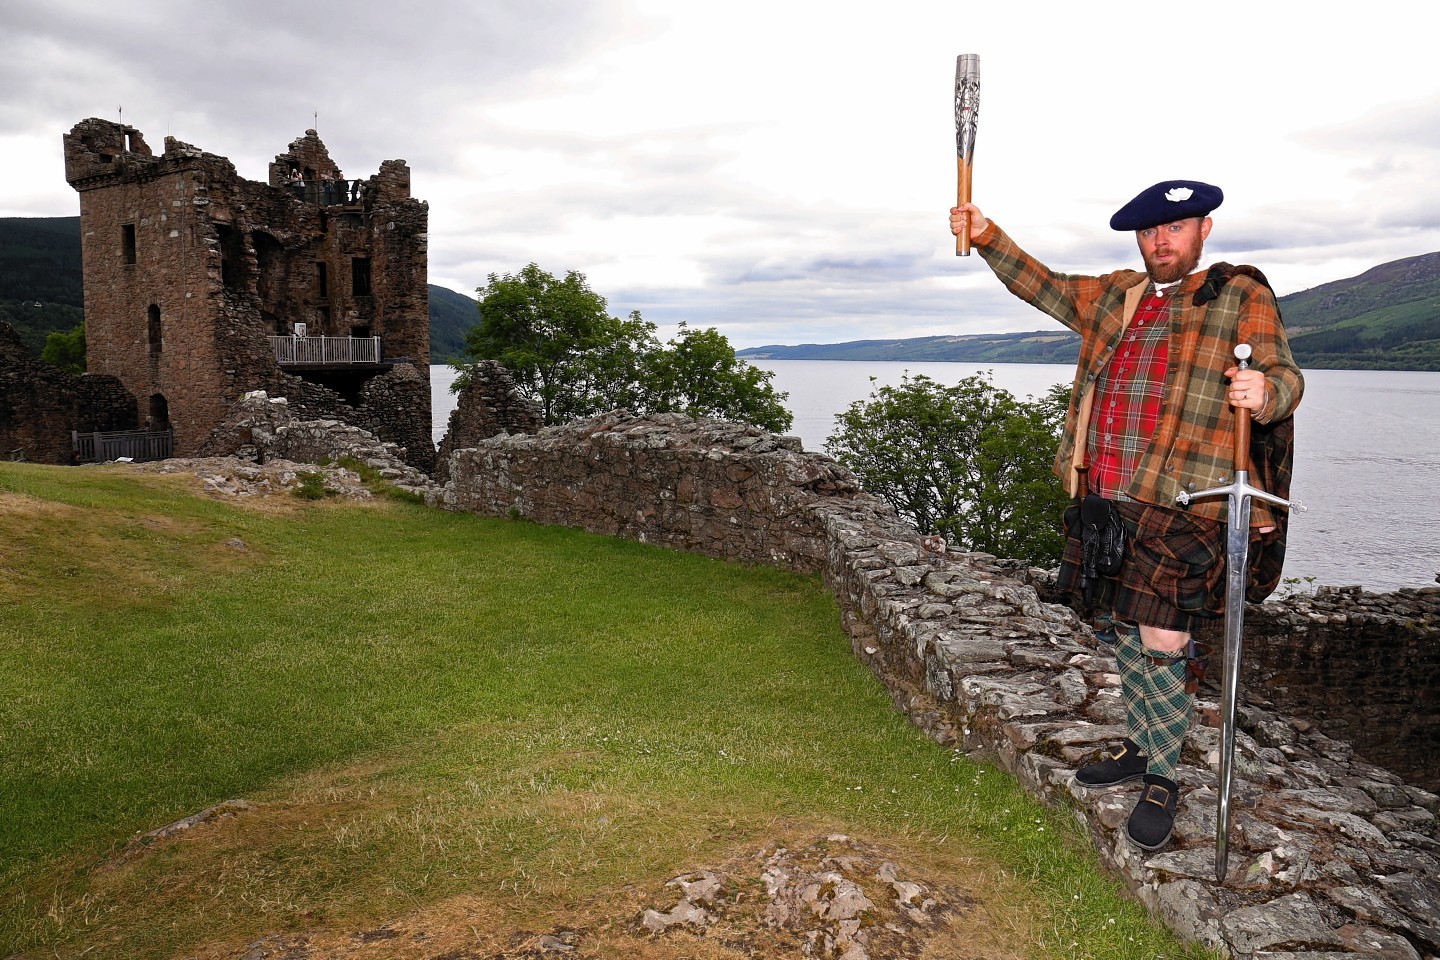 Baton reaches Urquhart Castle on the shores of Loch Ness